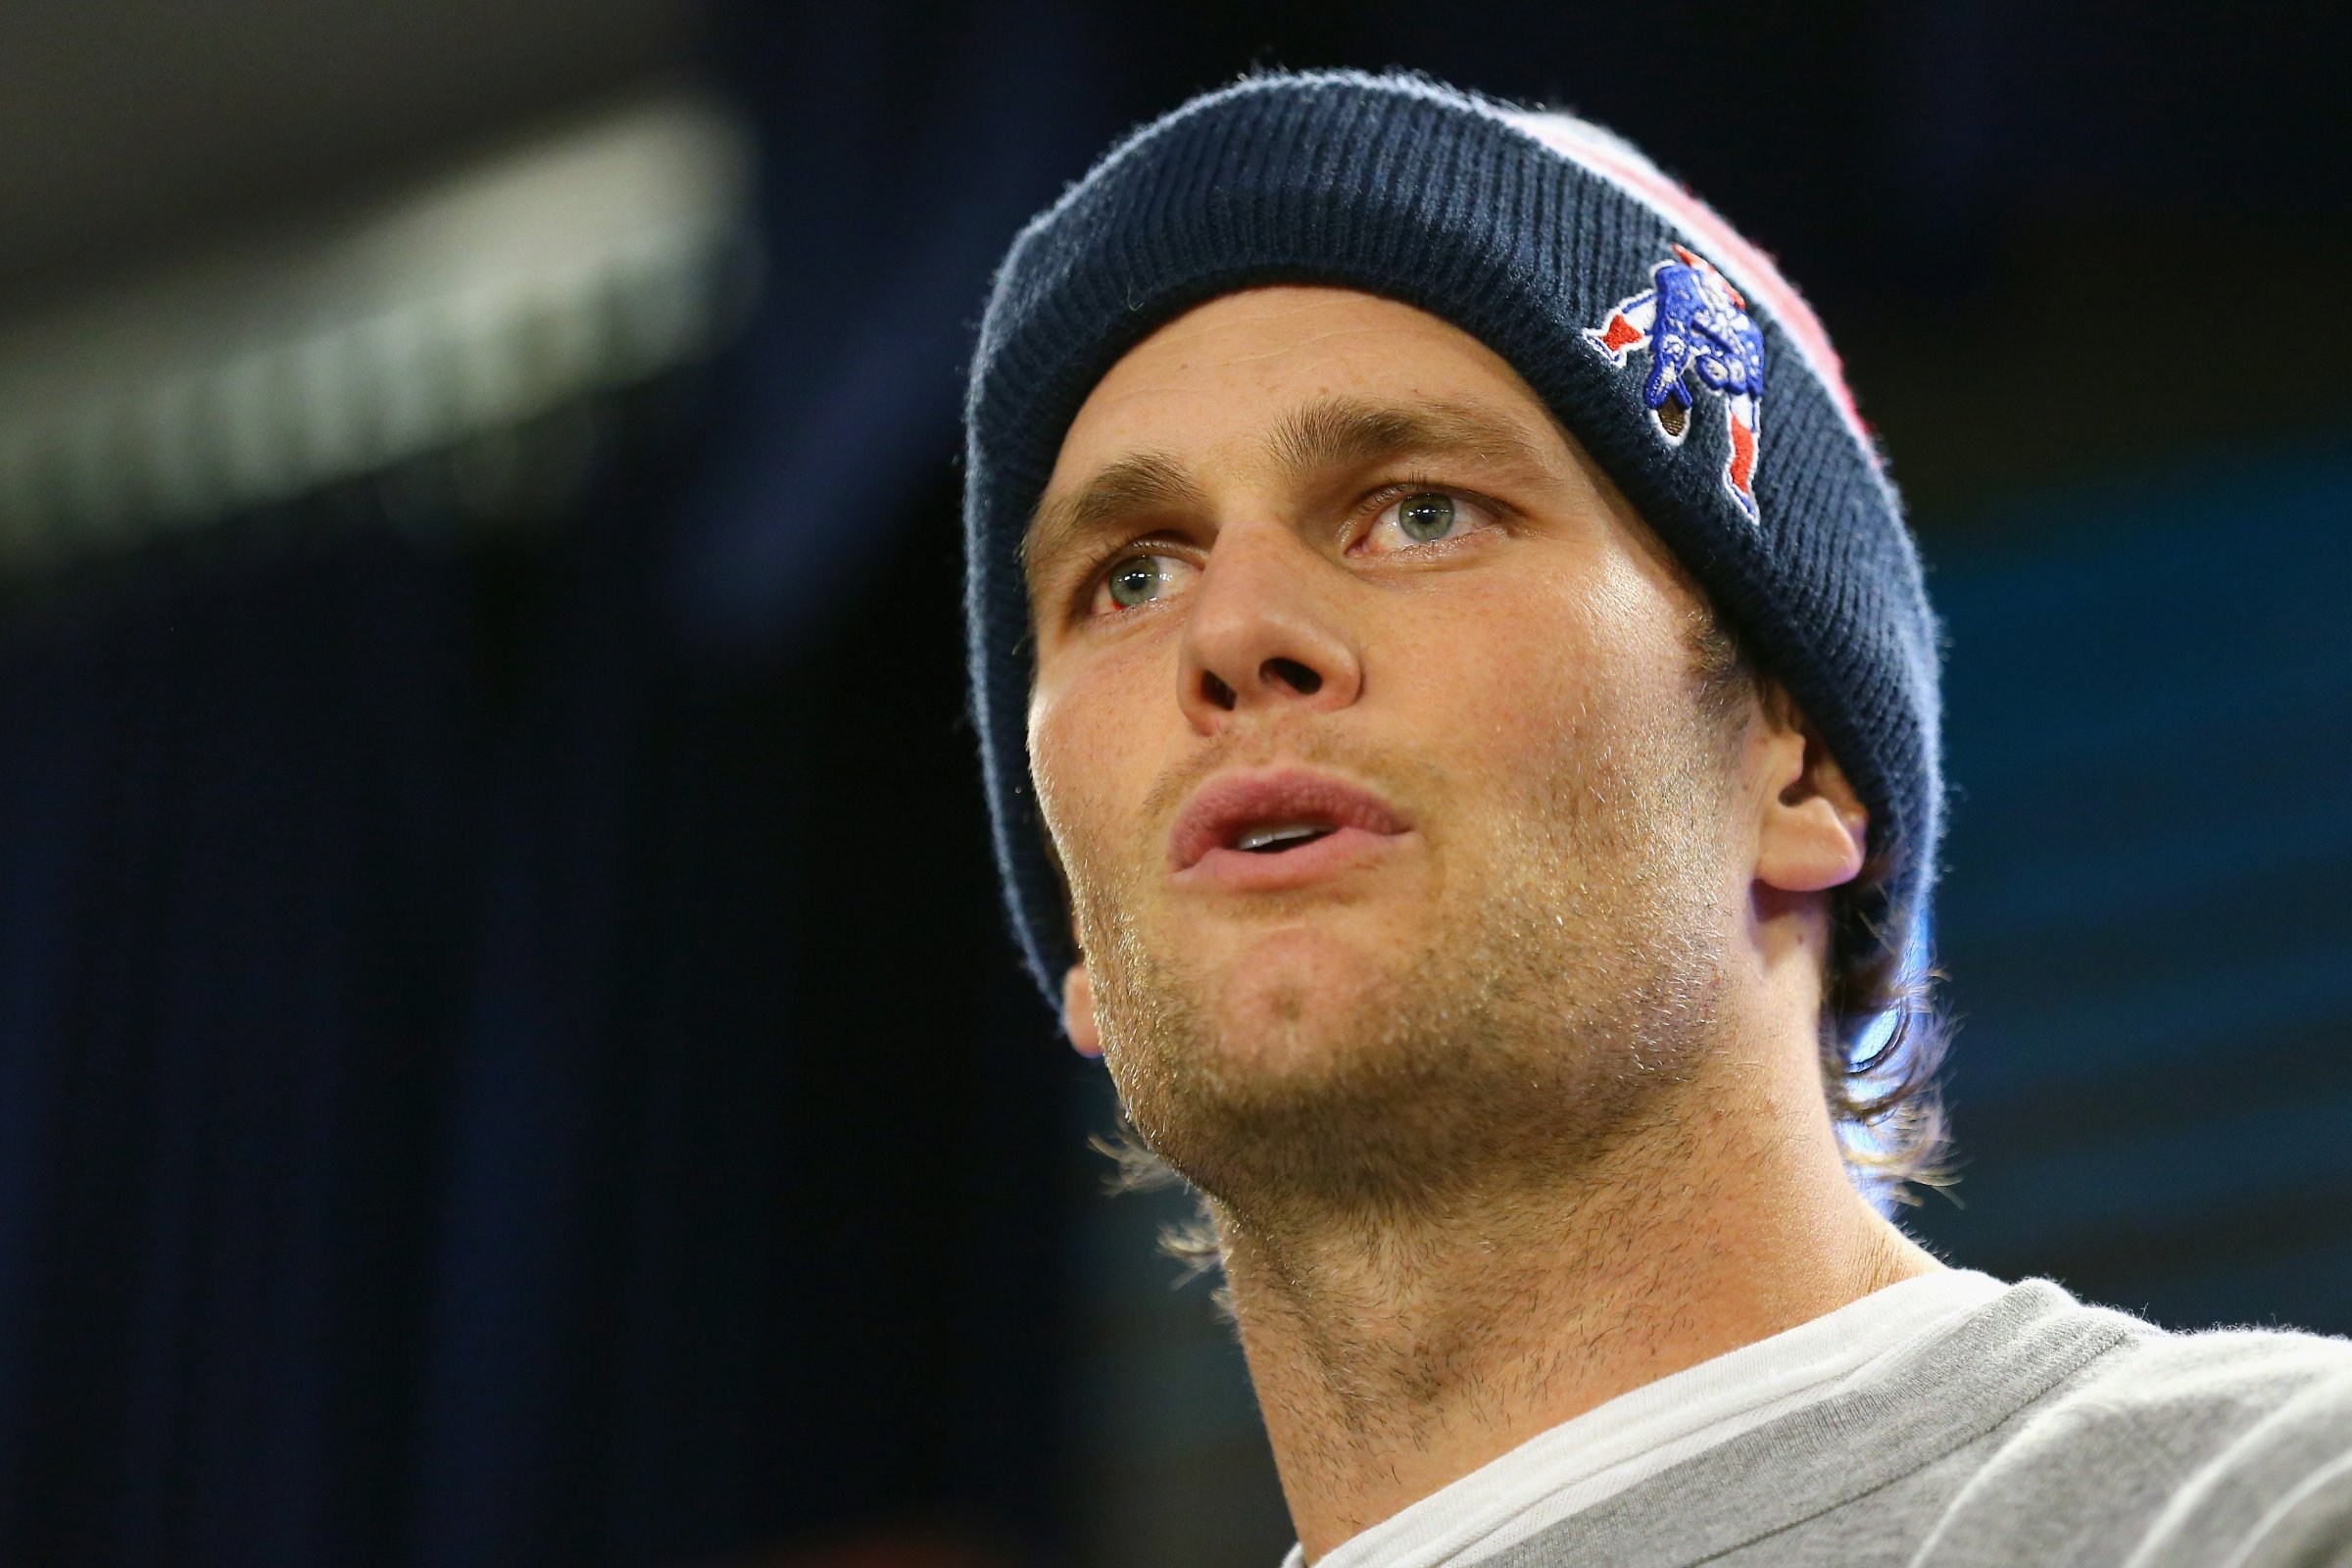 New England Patriots quarterback Tom Brady talks to the media during a press conference to address the under inflation of footballs used in the AFC championship game at Gillette Stadium on Jan. 22, 2015 in Foxboro, Mass.